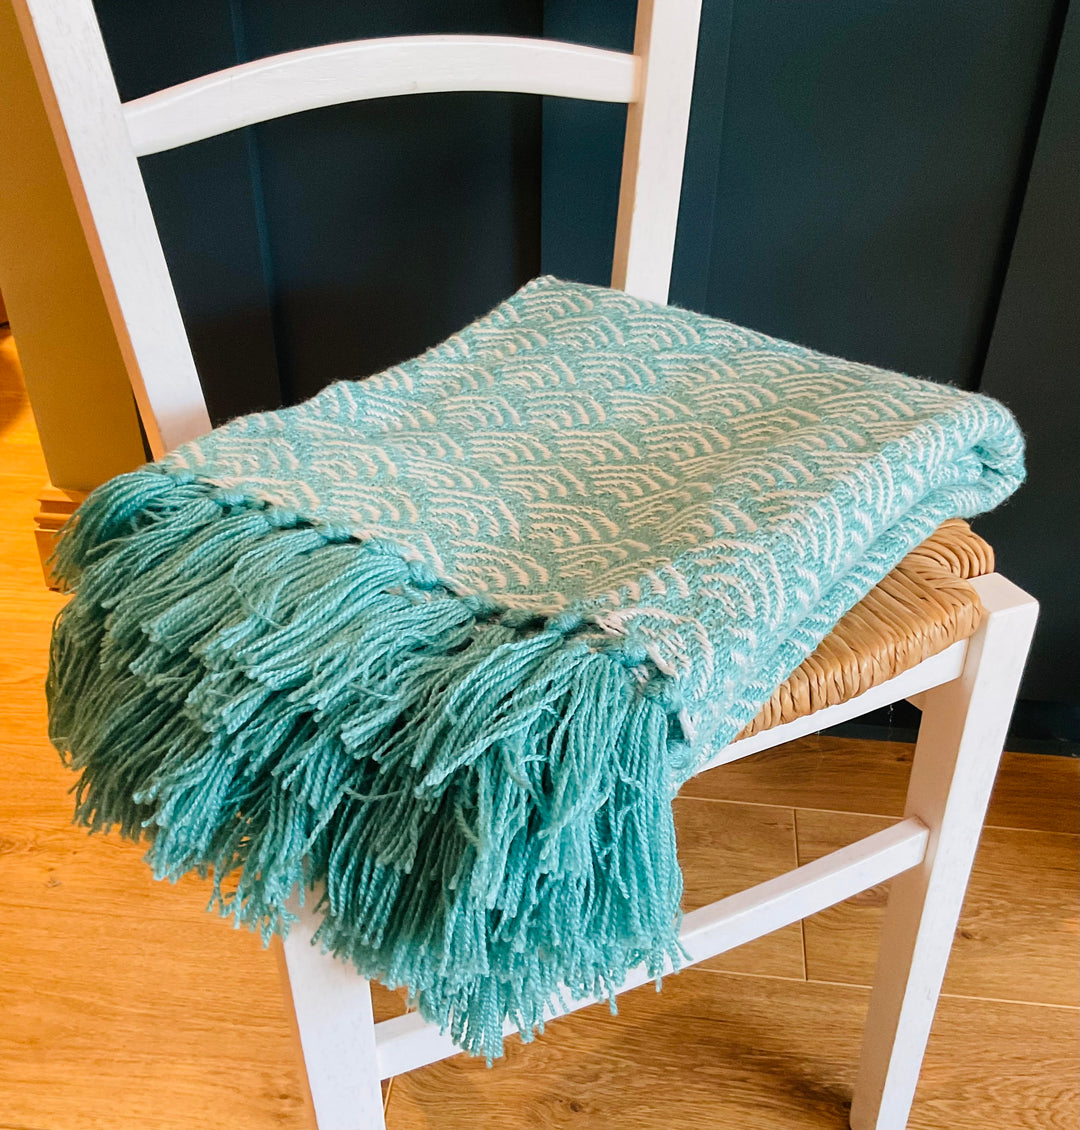 Turquoise Patterned Soft Throw Durable and Washable With Fringe 125 x 150 cm